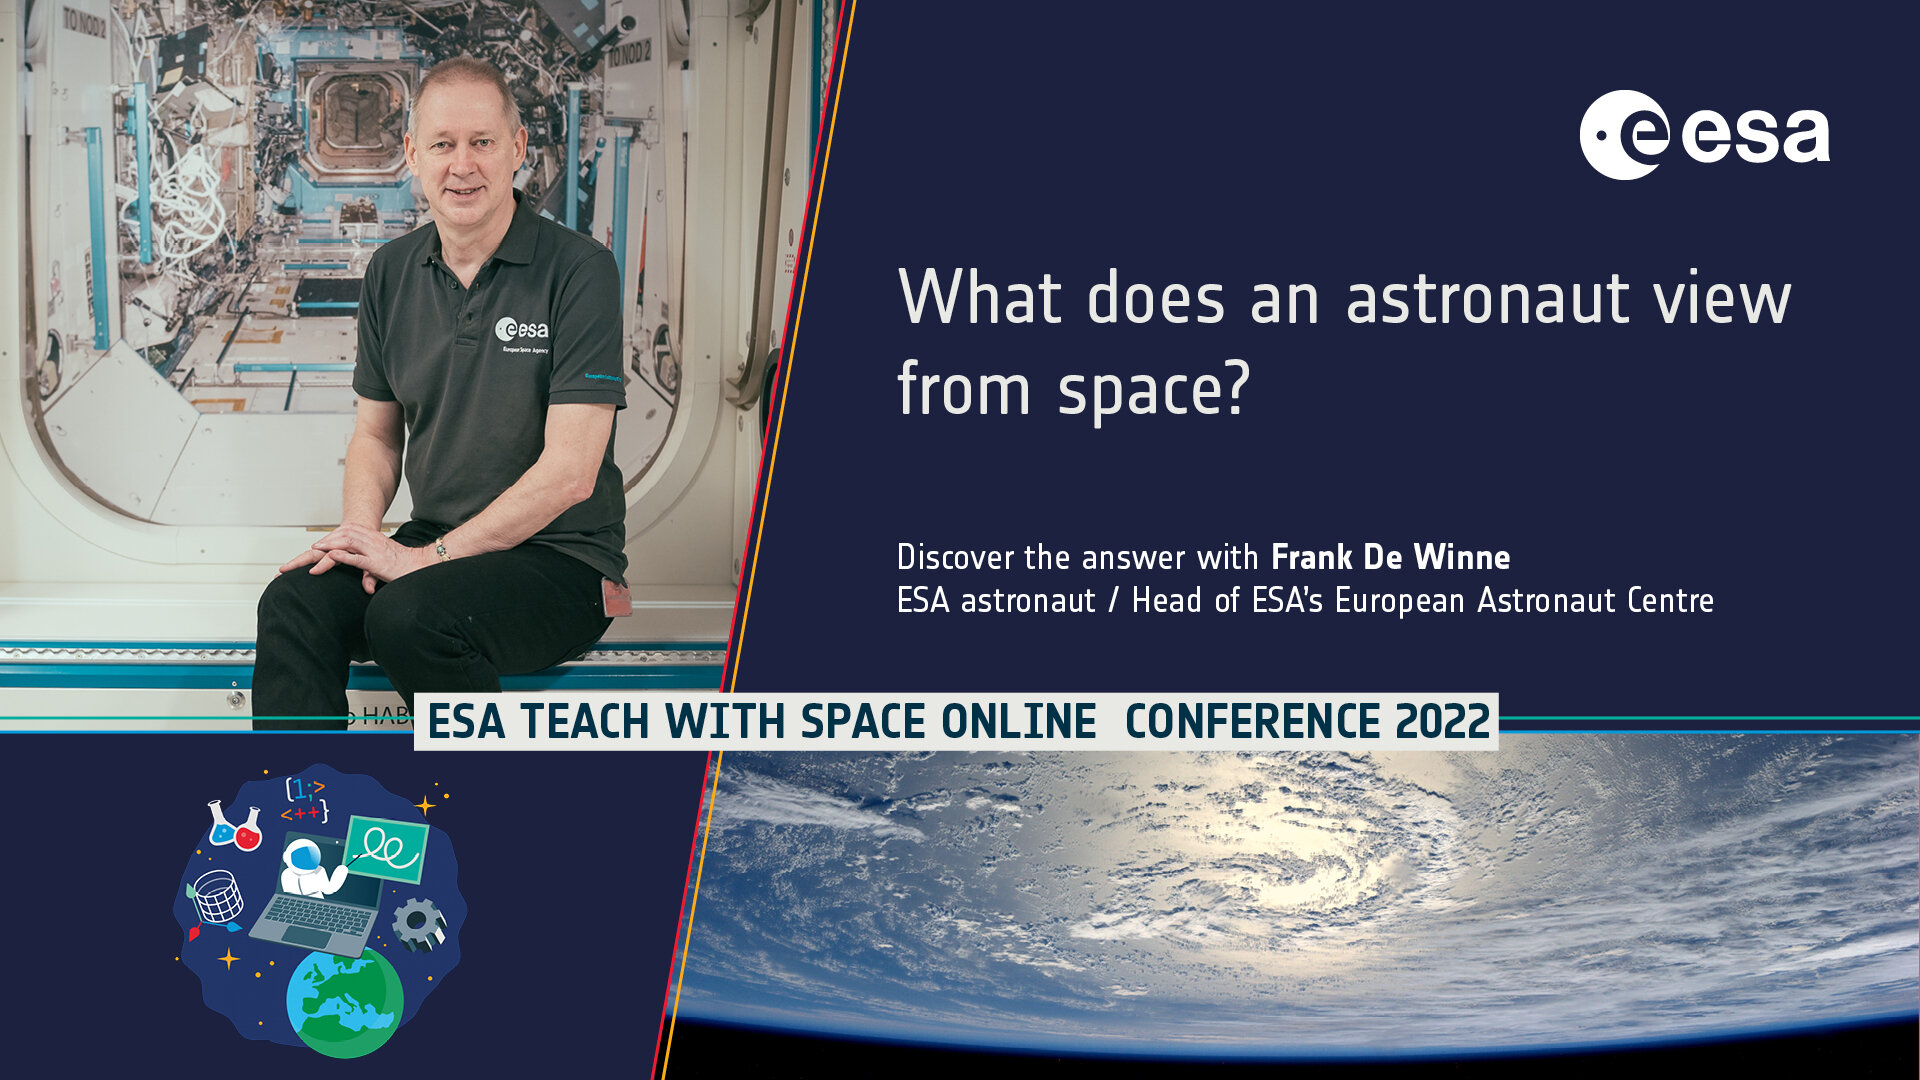 Frank de Wine is the key-note speaker for the "The Earth from above: an astronaut’s view" plenary during ESA 's Teach with Space Online Conference 2022